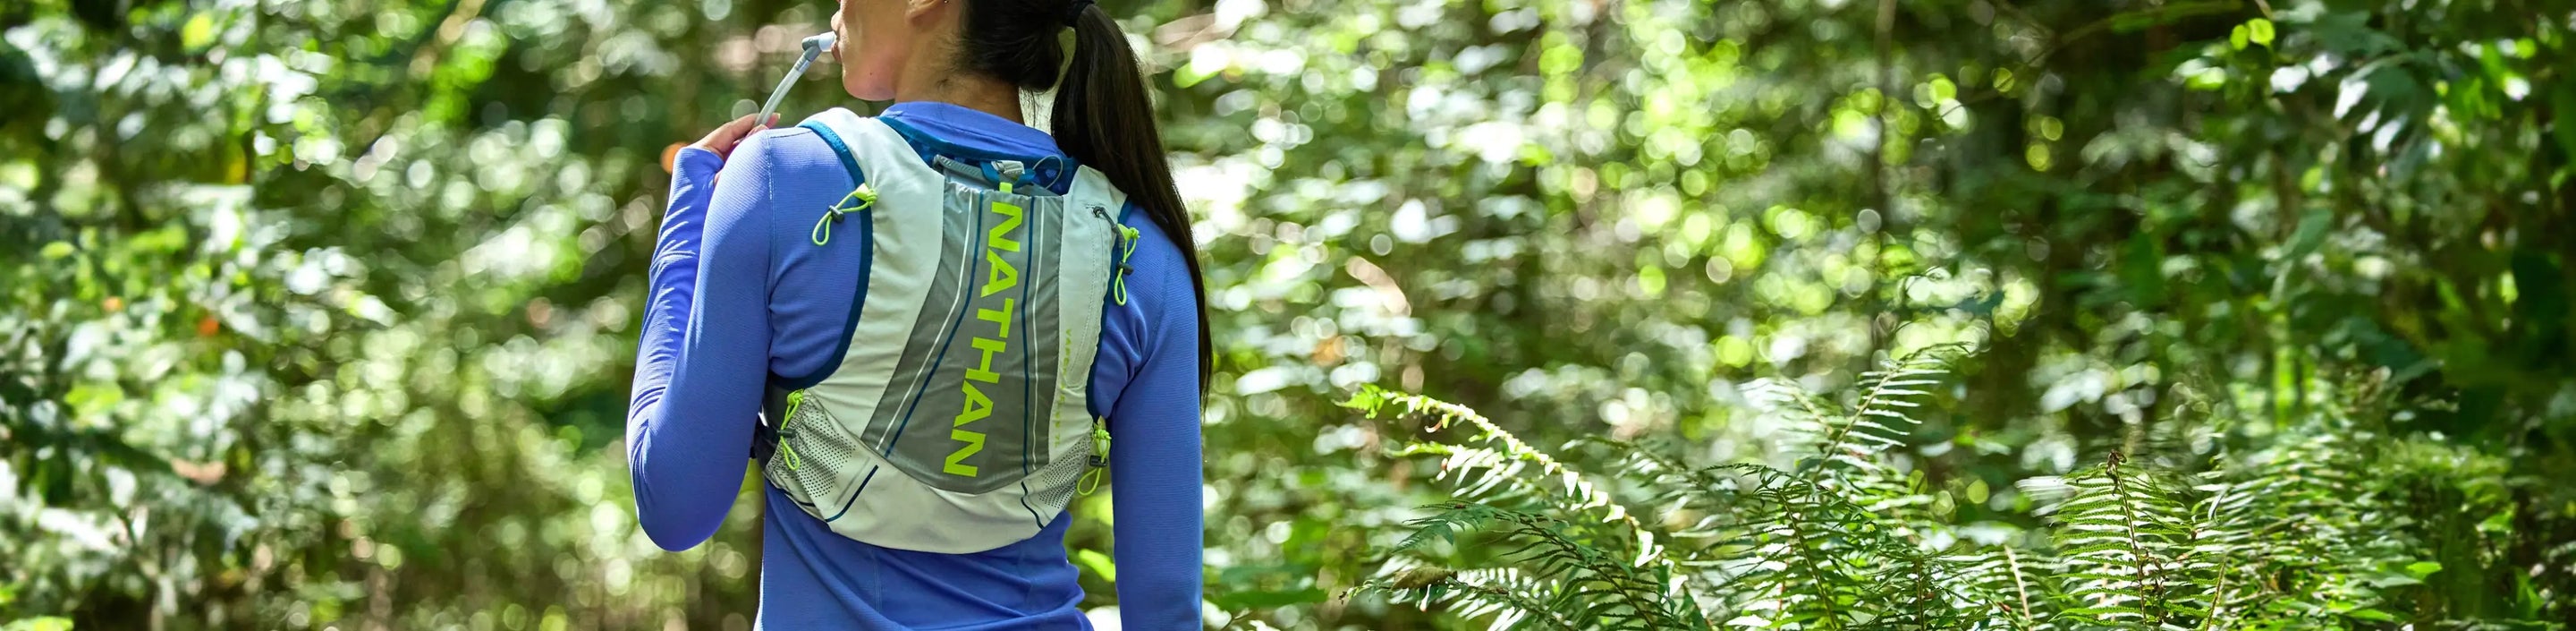 woman wearing Nathan Sports hydration pack surrounded by greenery